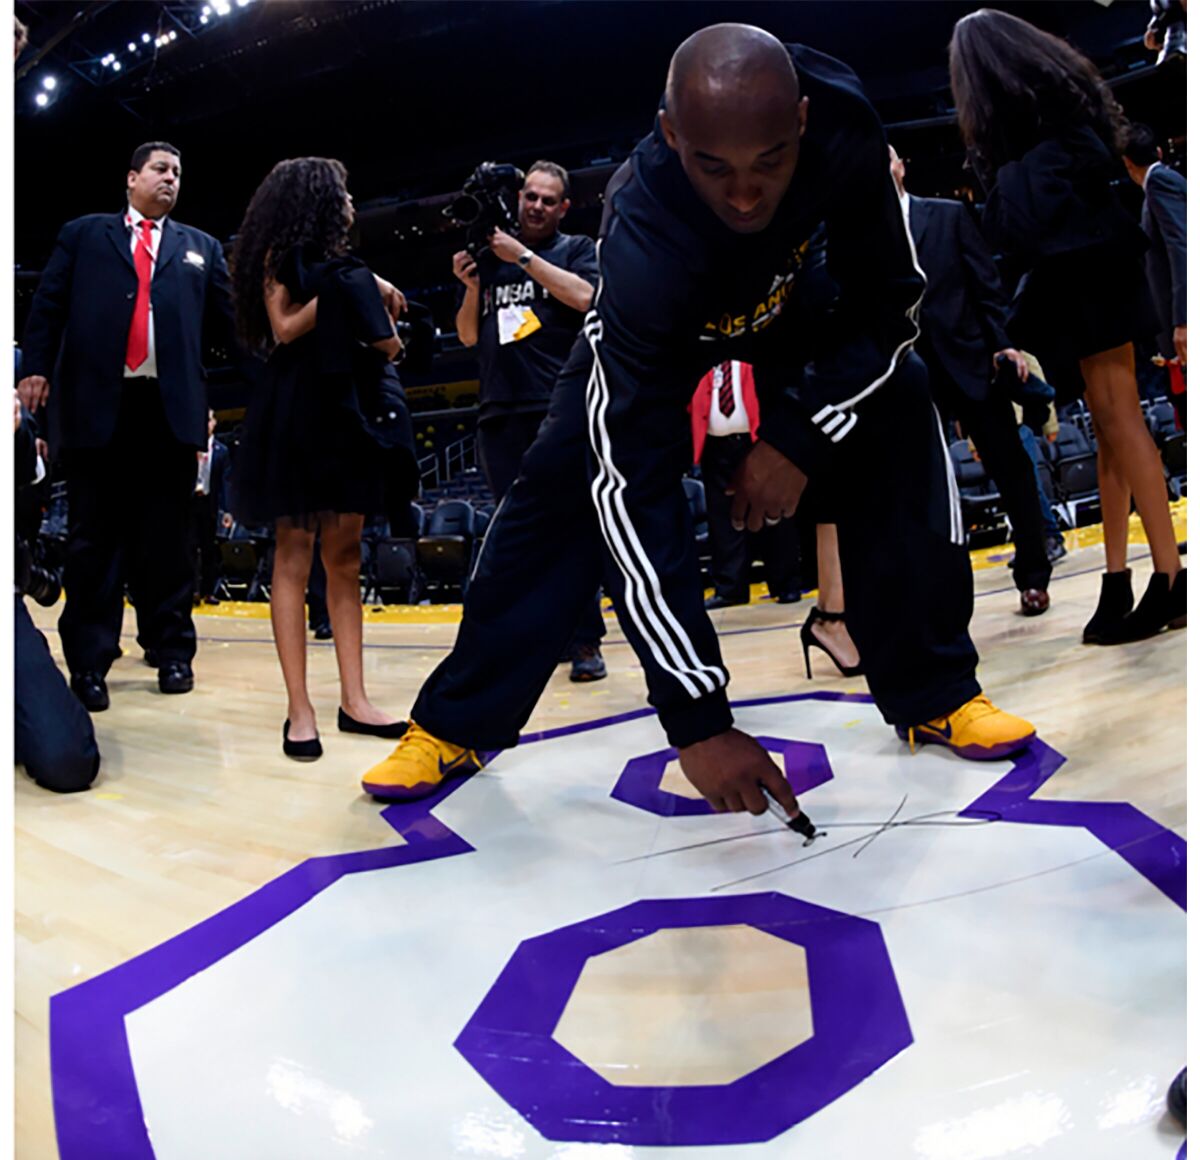 Kobe Bryant signs the No. 8 painted on the Staples Center floor following his final NBA game on April 13, 2016.